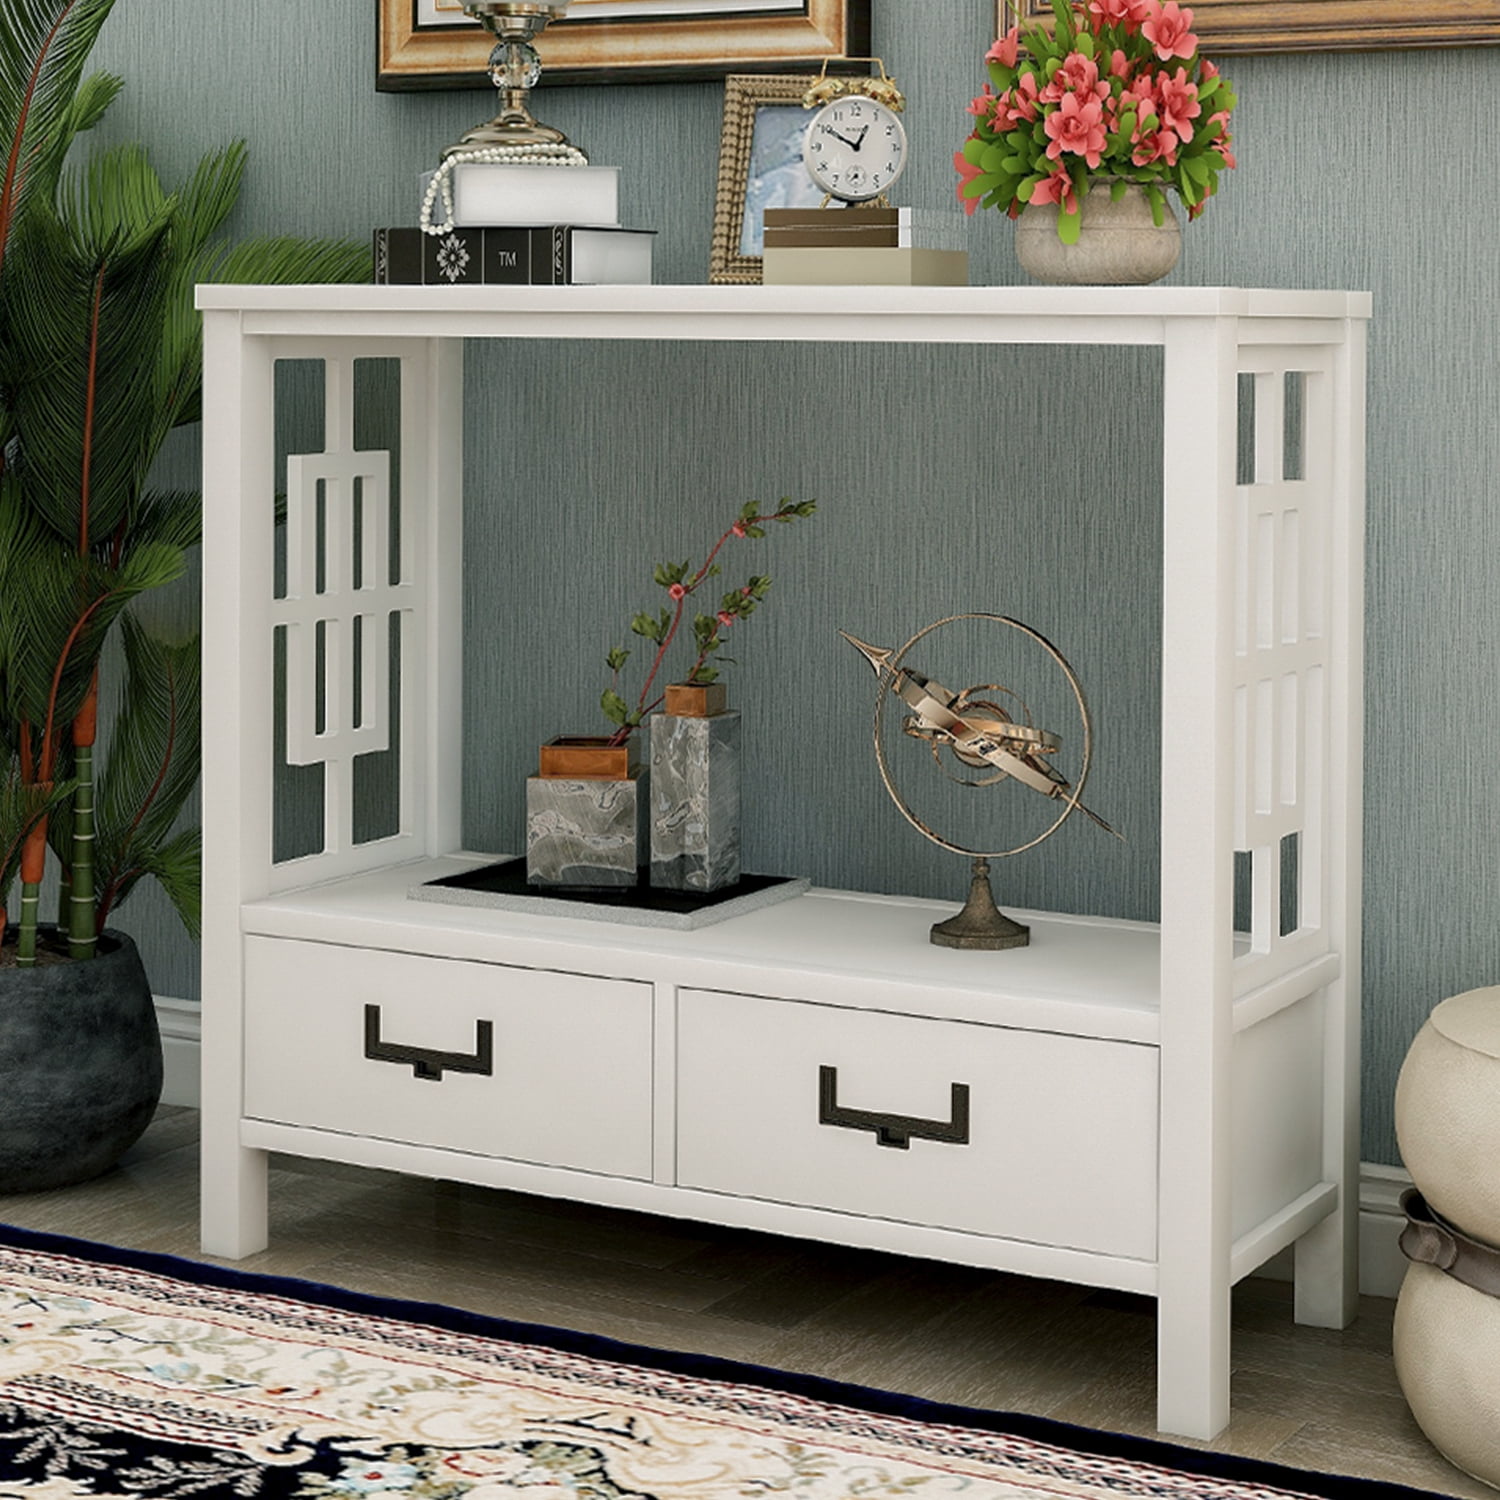 TREXM Console Sofa Table with Two Bottom Drawers, Farmhouse Narrow Sofa Table for Entryway (White)